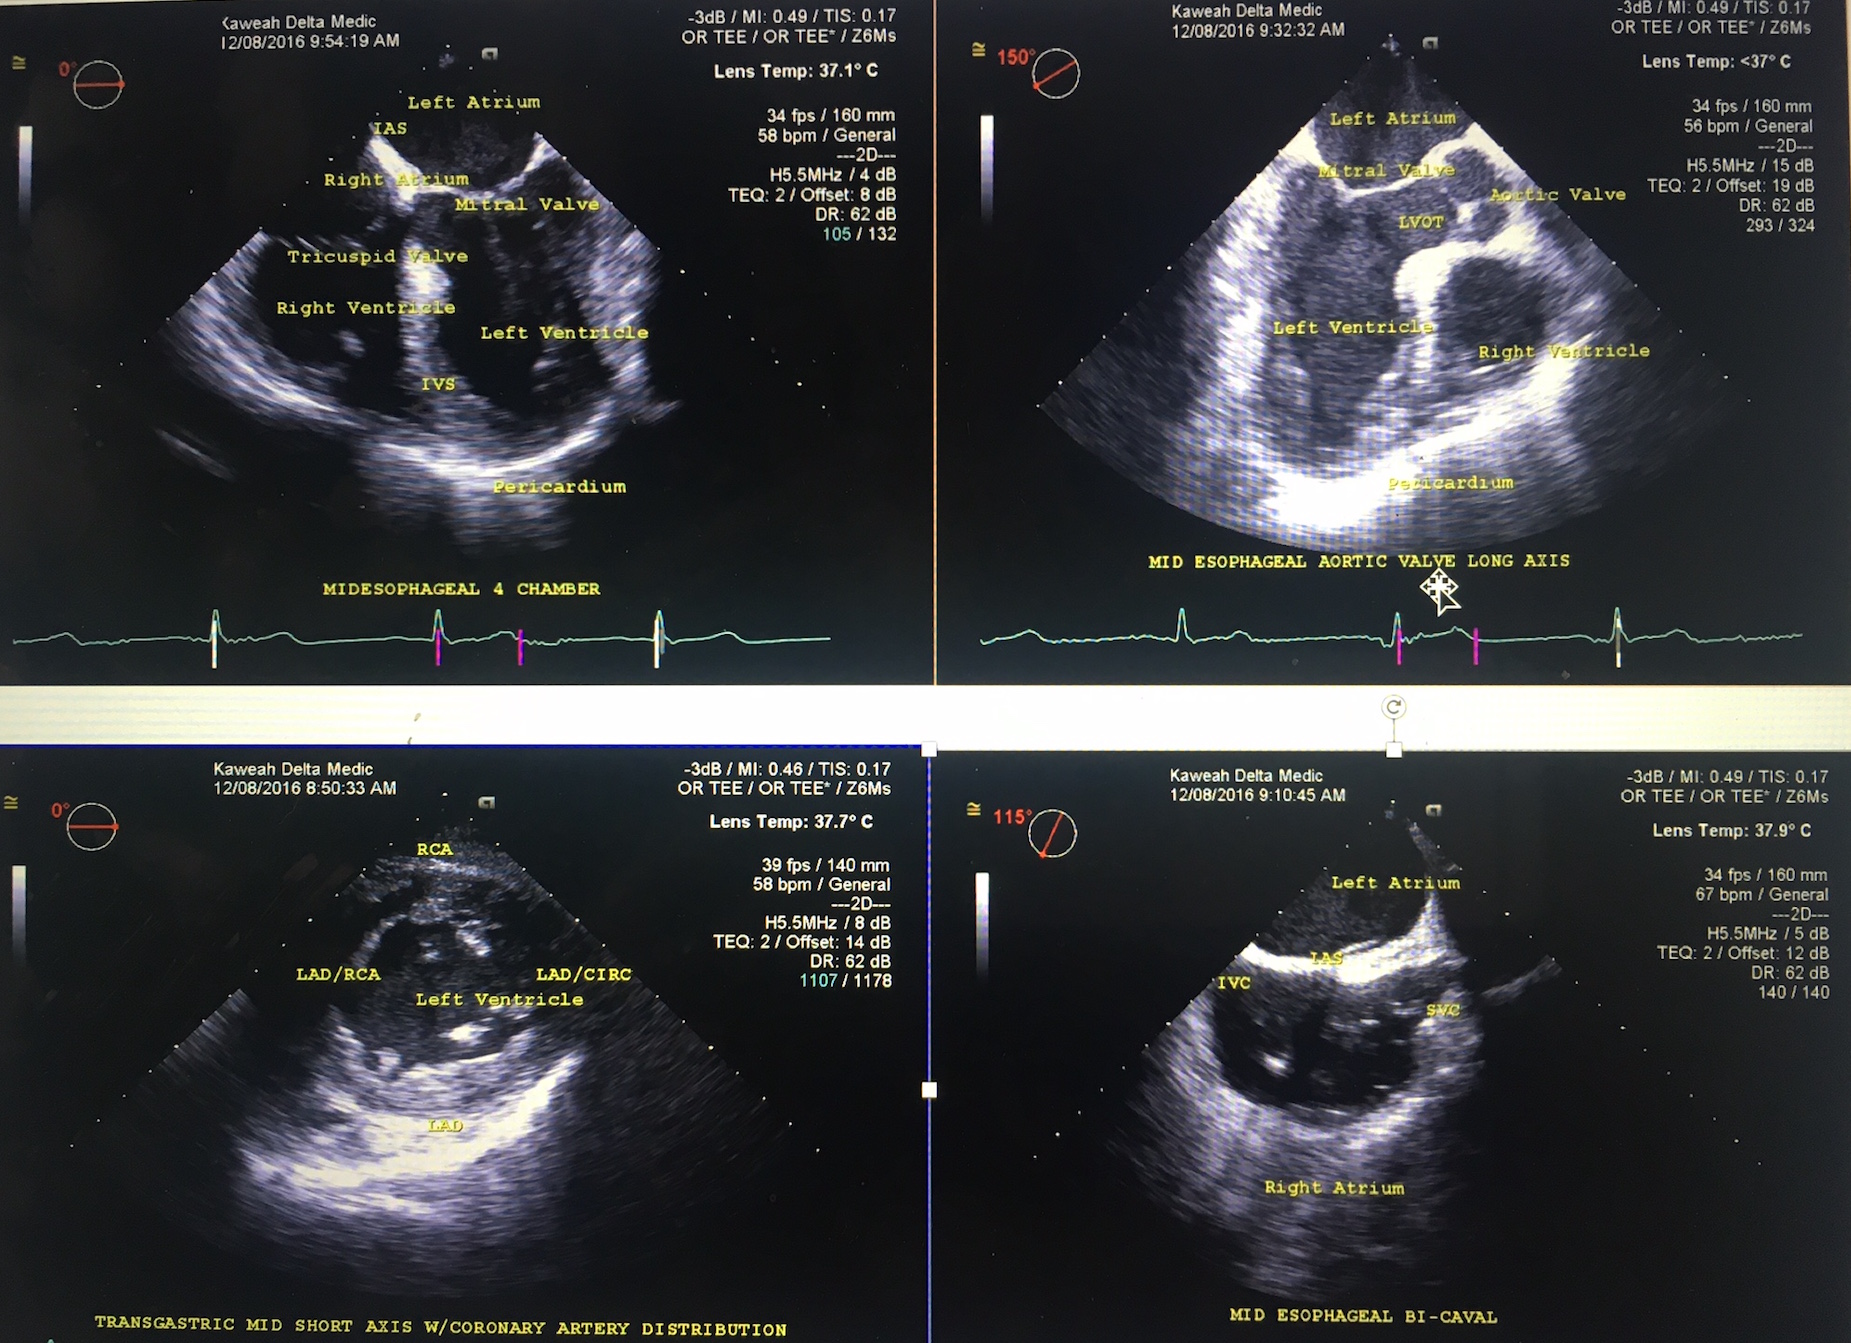 4 basic views to use in the patient who presents in cardiac arrest Image, Image 1; Midesophageal Four-Chamber view (MEFC), Im